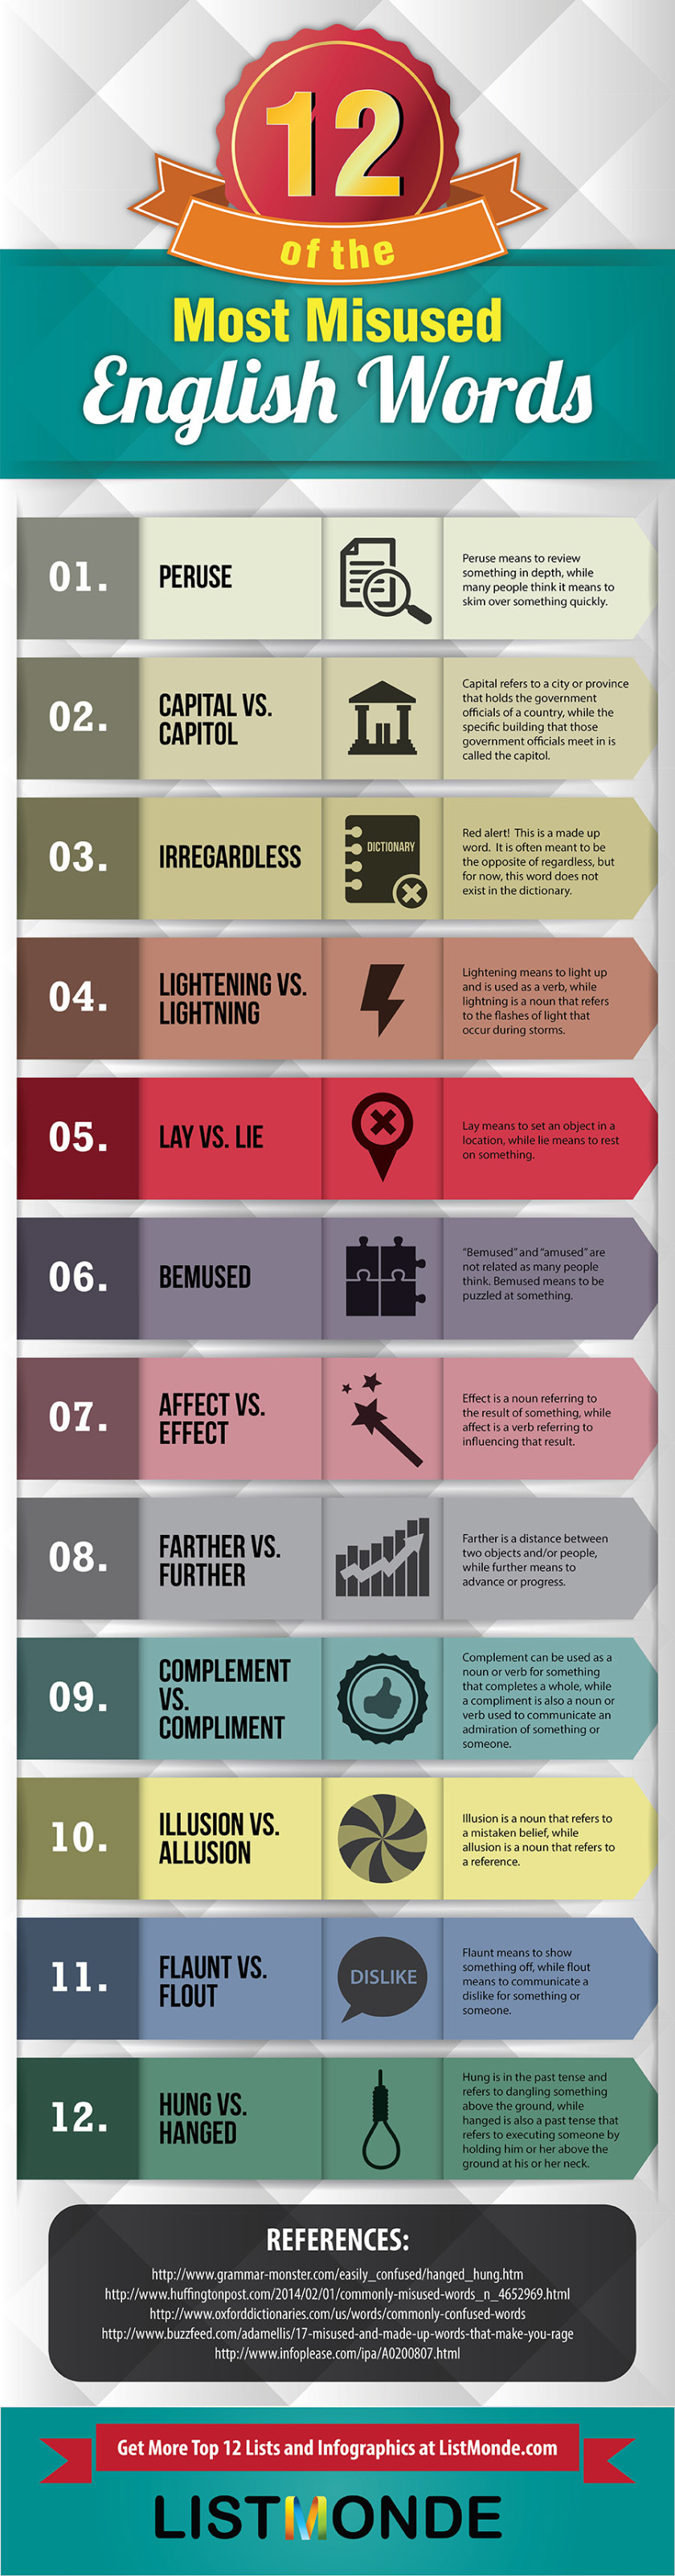 12 Most Misused English Words Infographic 